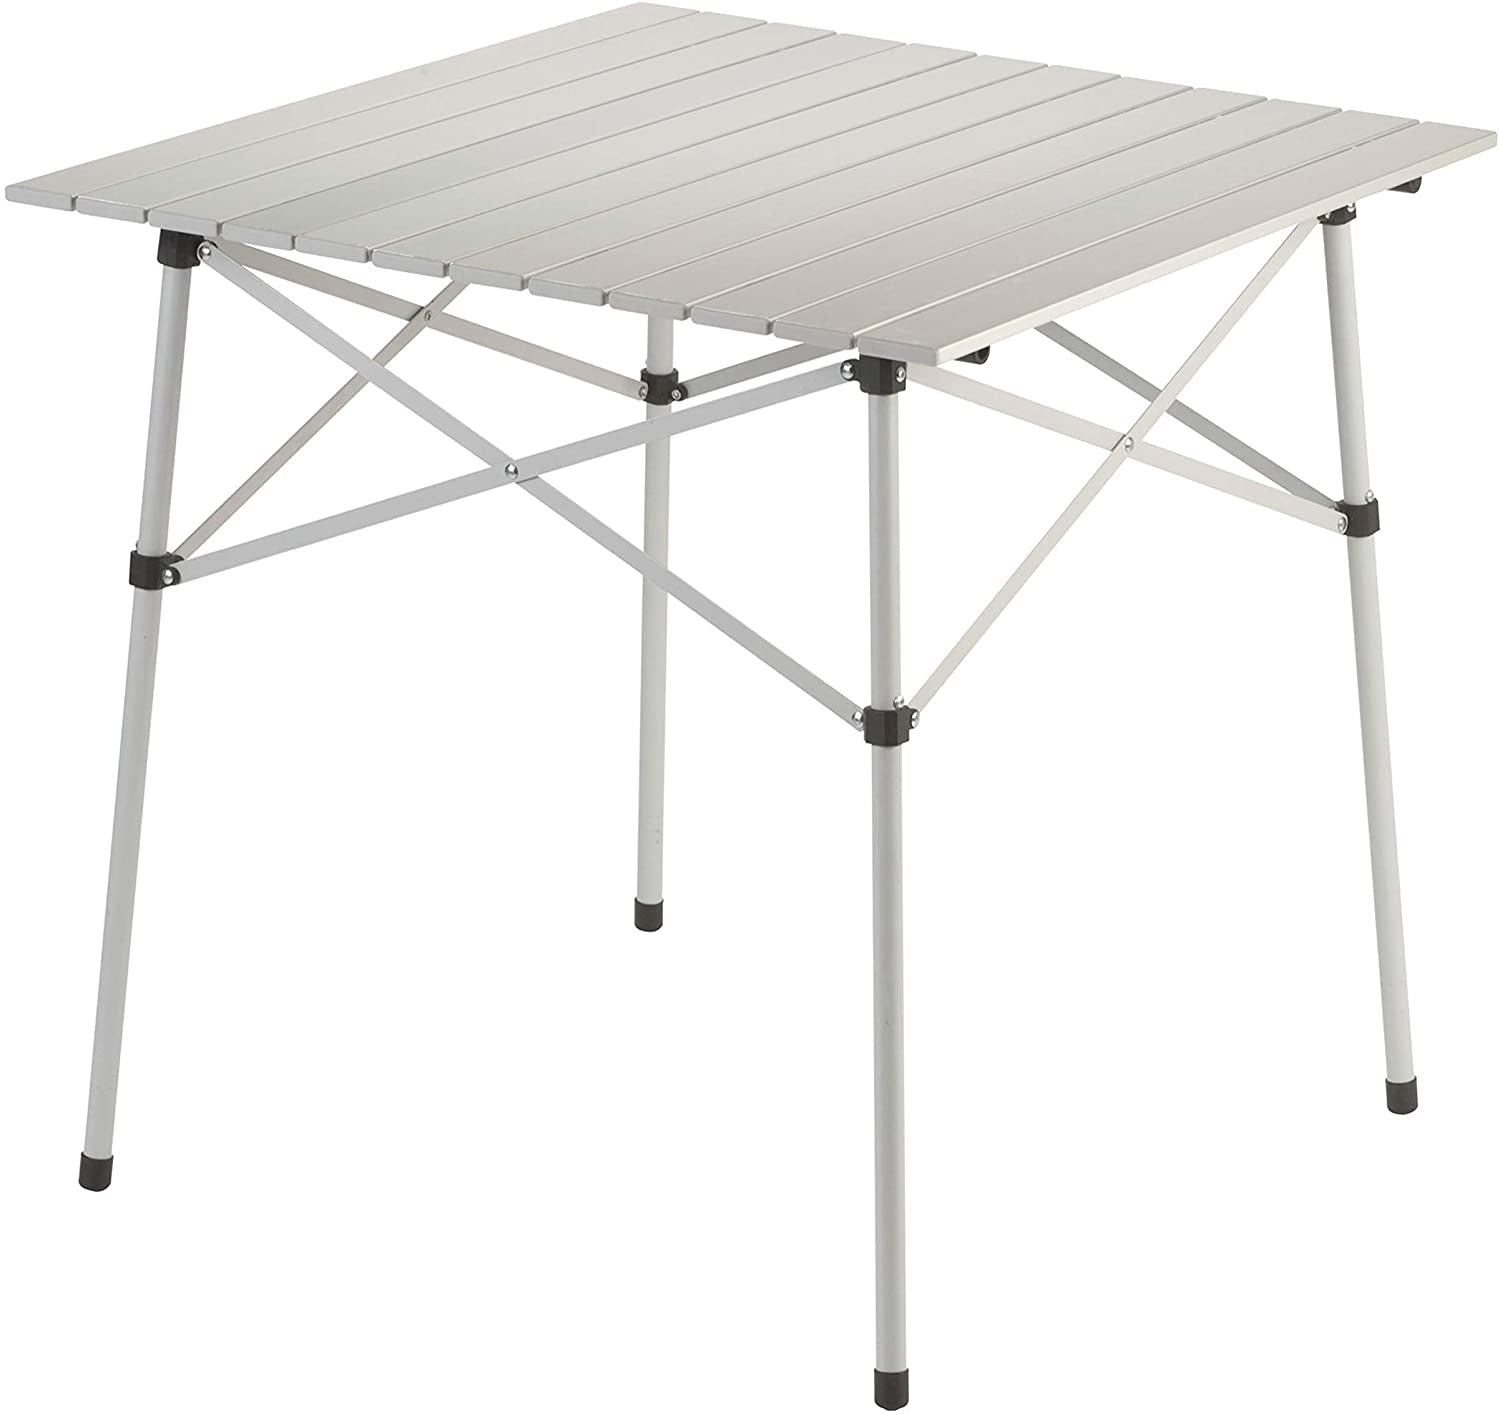 Outdoor Compact Folding Table, Sturdy Aluminum Camping Table with Snap-Together Design, 4 Seats & Carry Bag Included; Great for Camping, Tailgating, Grilling & More